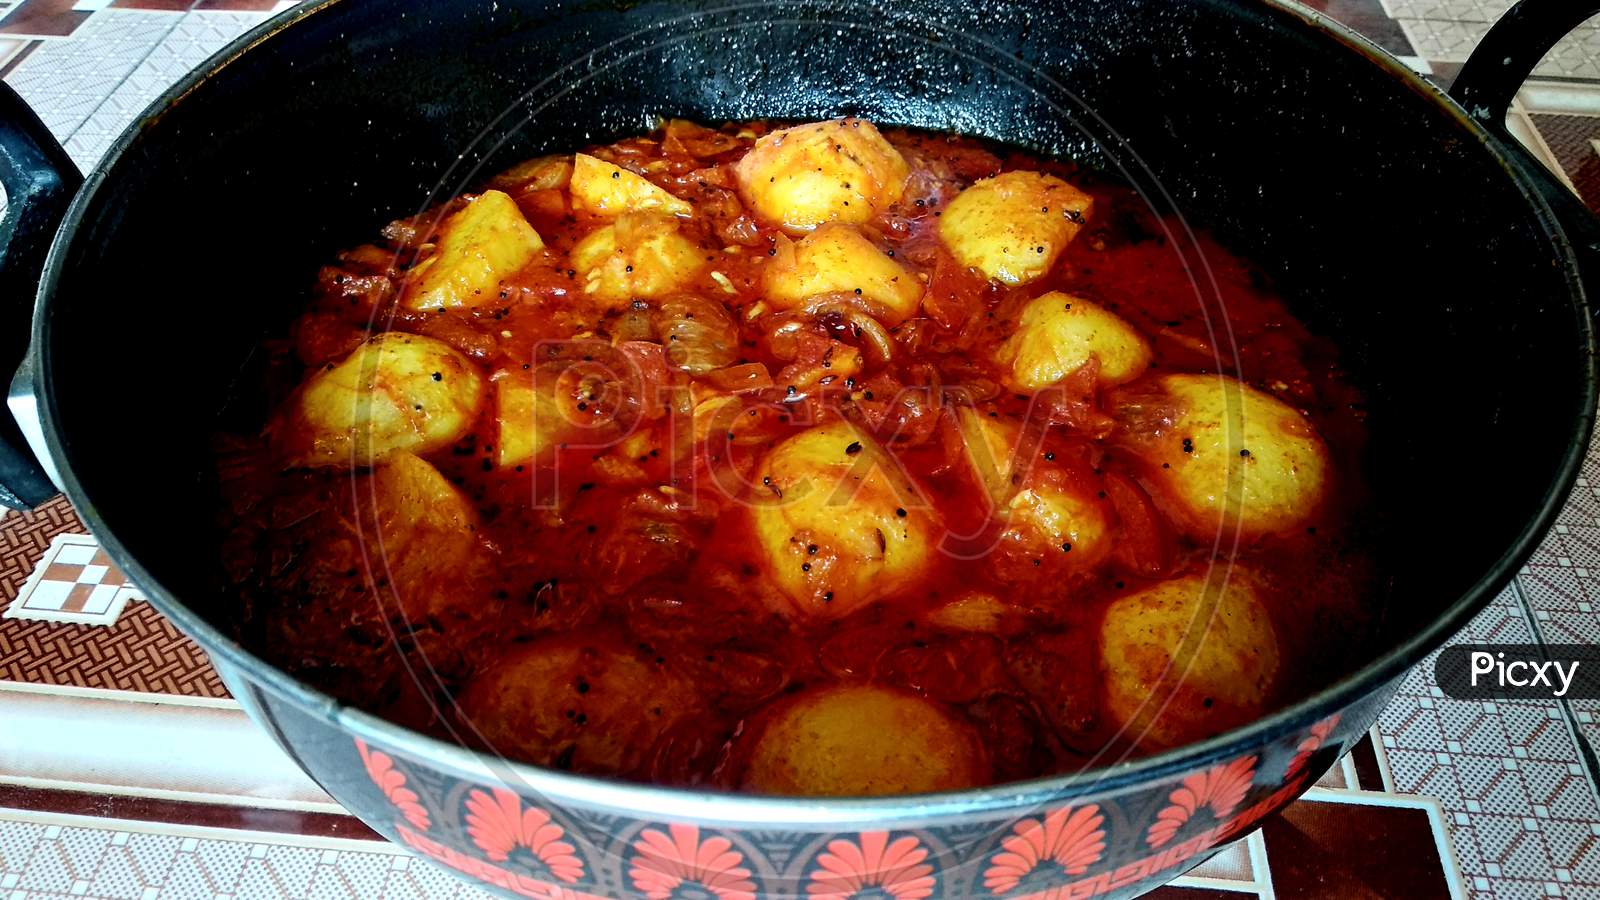 Dum Aloo or Aloo dum, popular Indian dish. Spices and flavoured with chilli, garlic and fennel in smooth gravy which coat the fried potatoes.